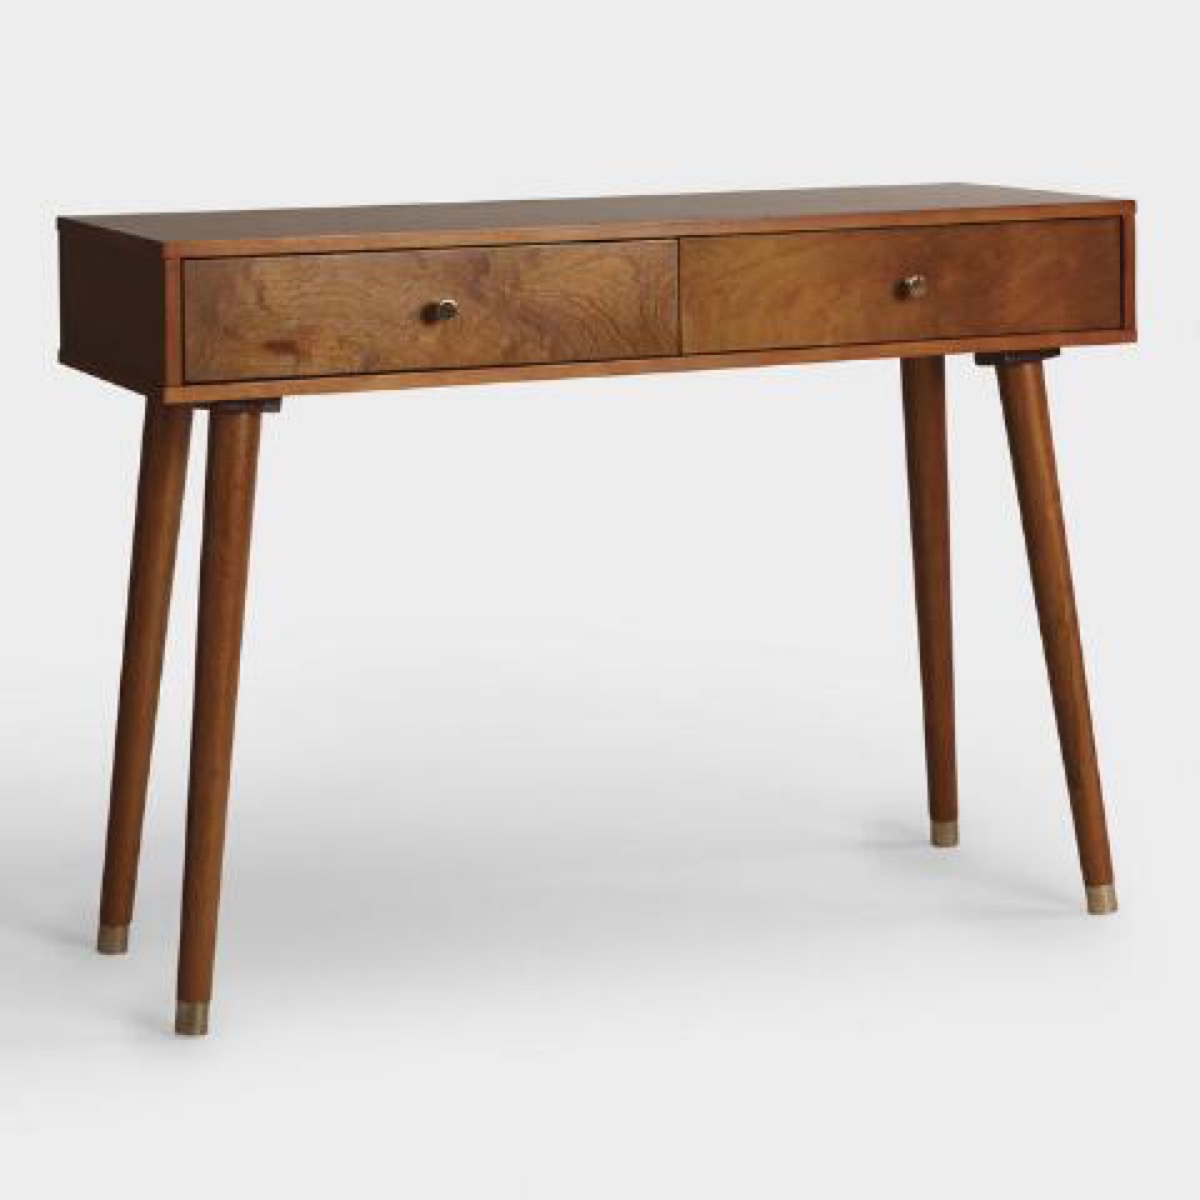 Midcentury modern console table